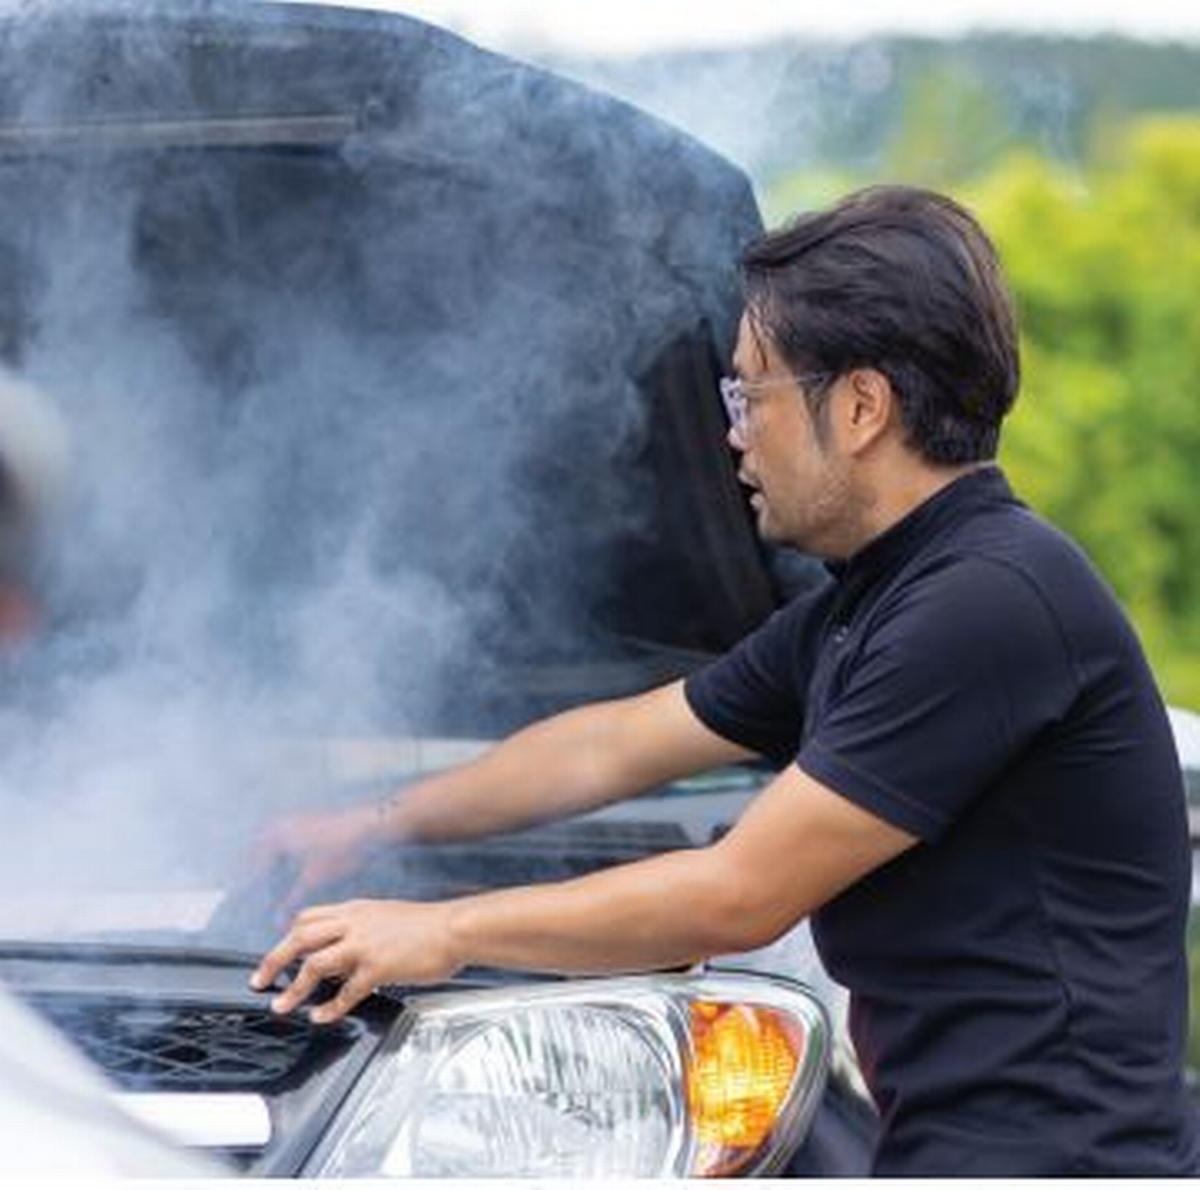 My Engine Never Overheats. Why Should I Get a Cooling System Service?